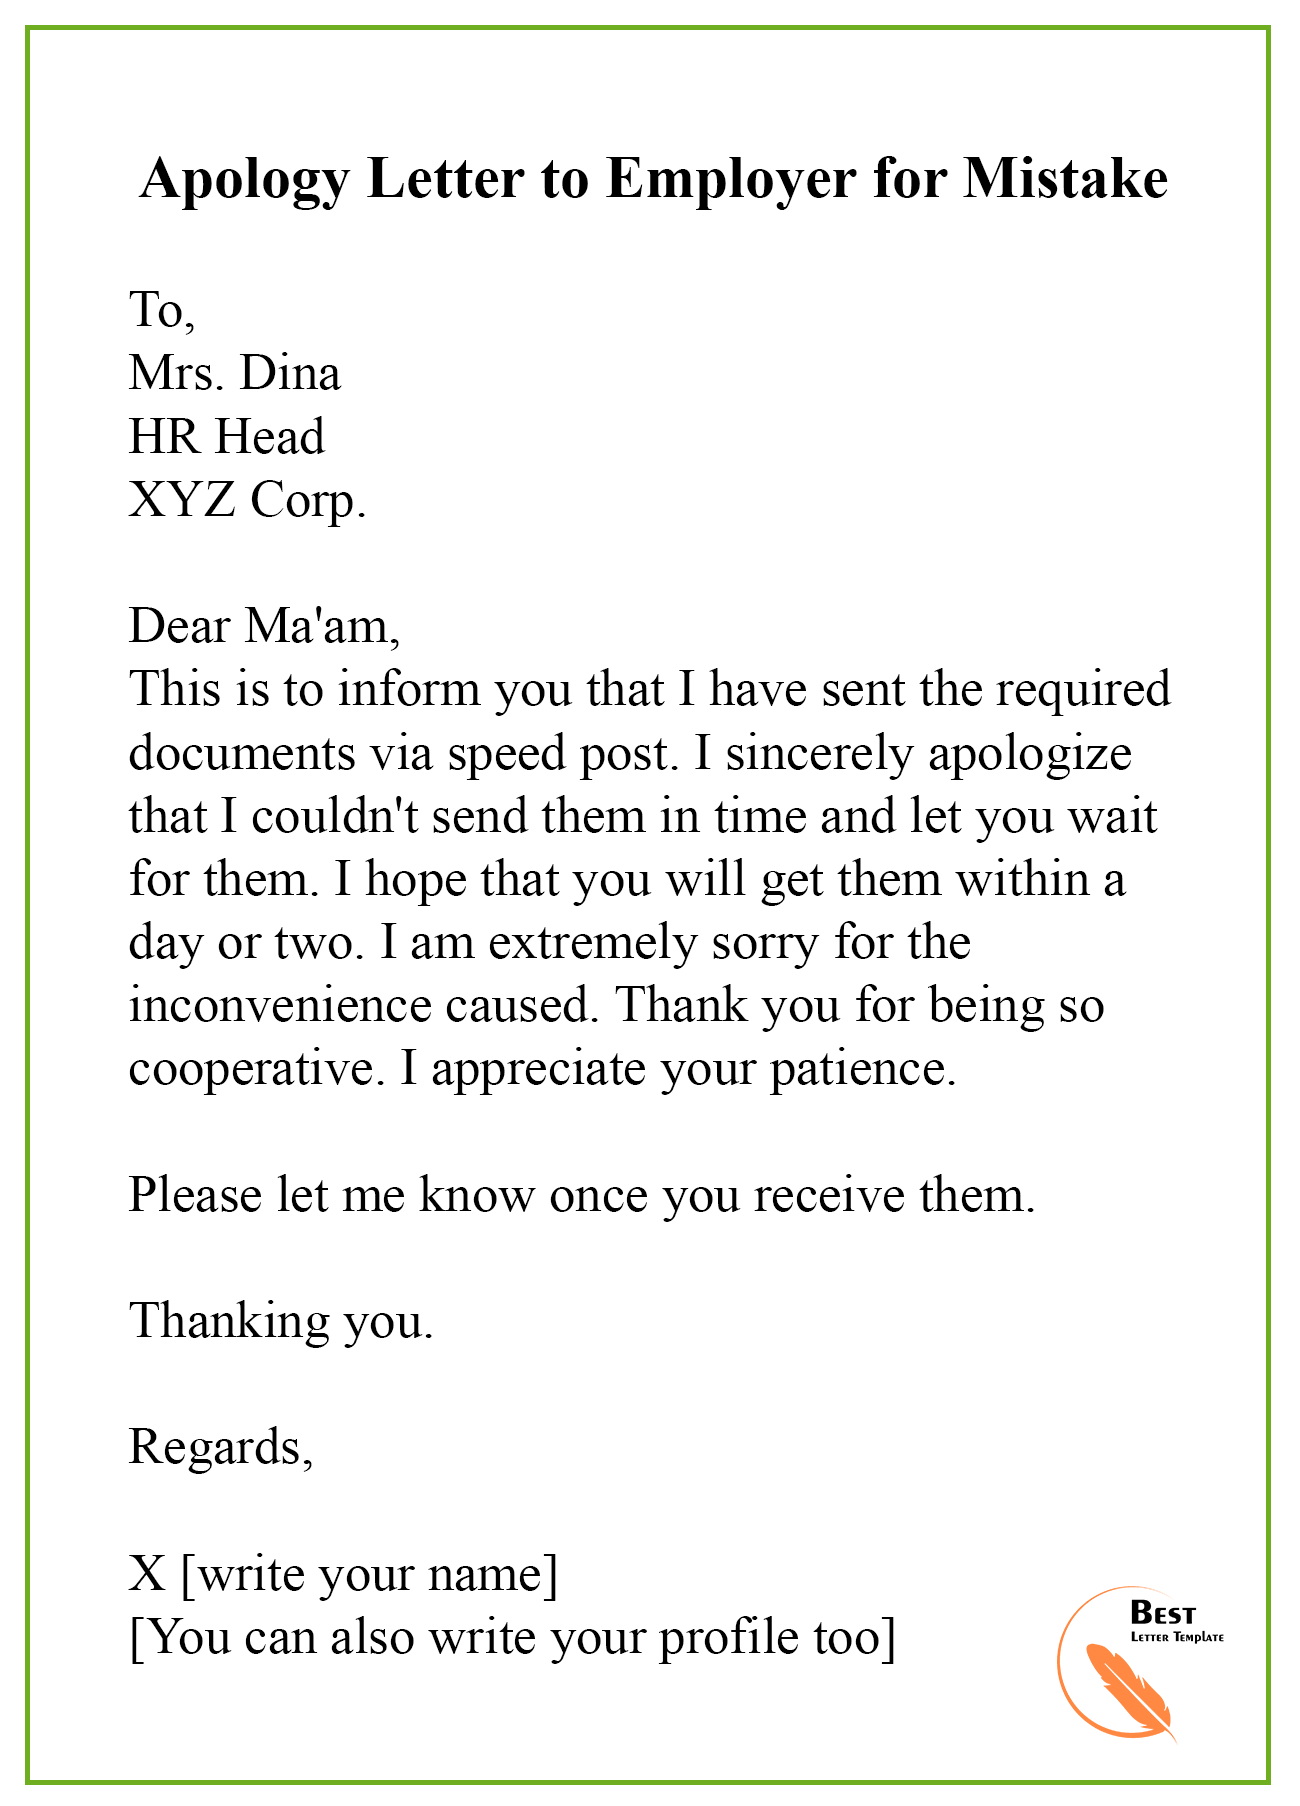 apology-letter-to-employer-for-mistake-best-letter-template